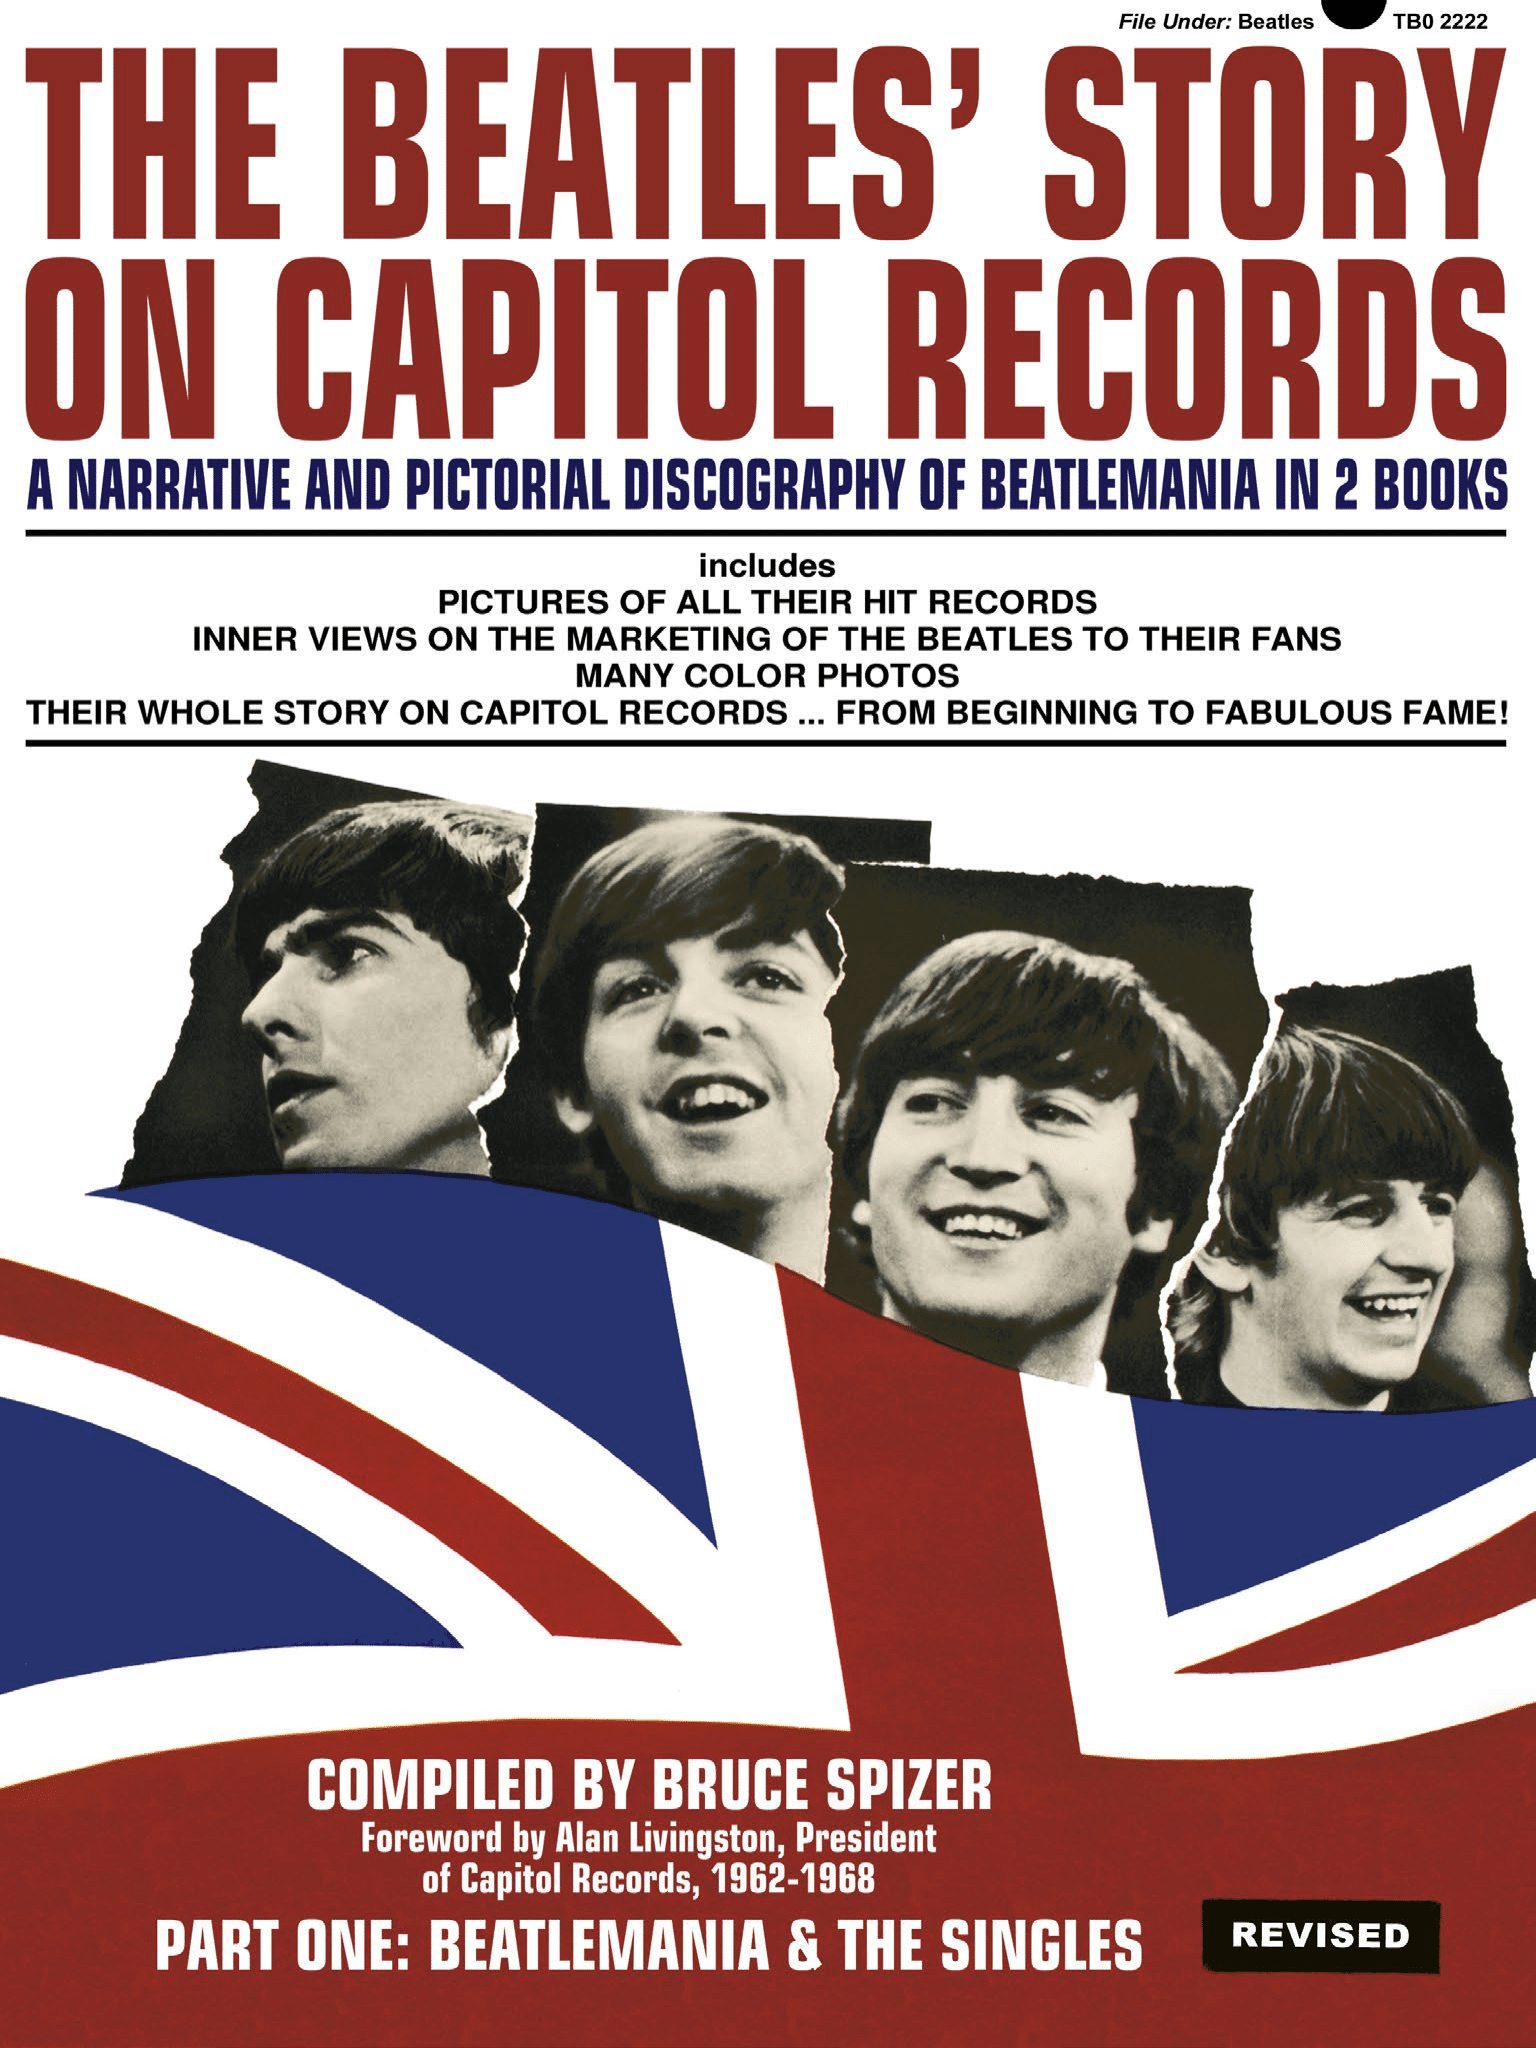 Beatles Story On Capitol Records (Book Cover Image)